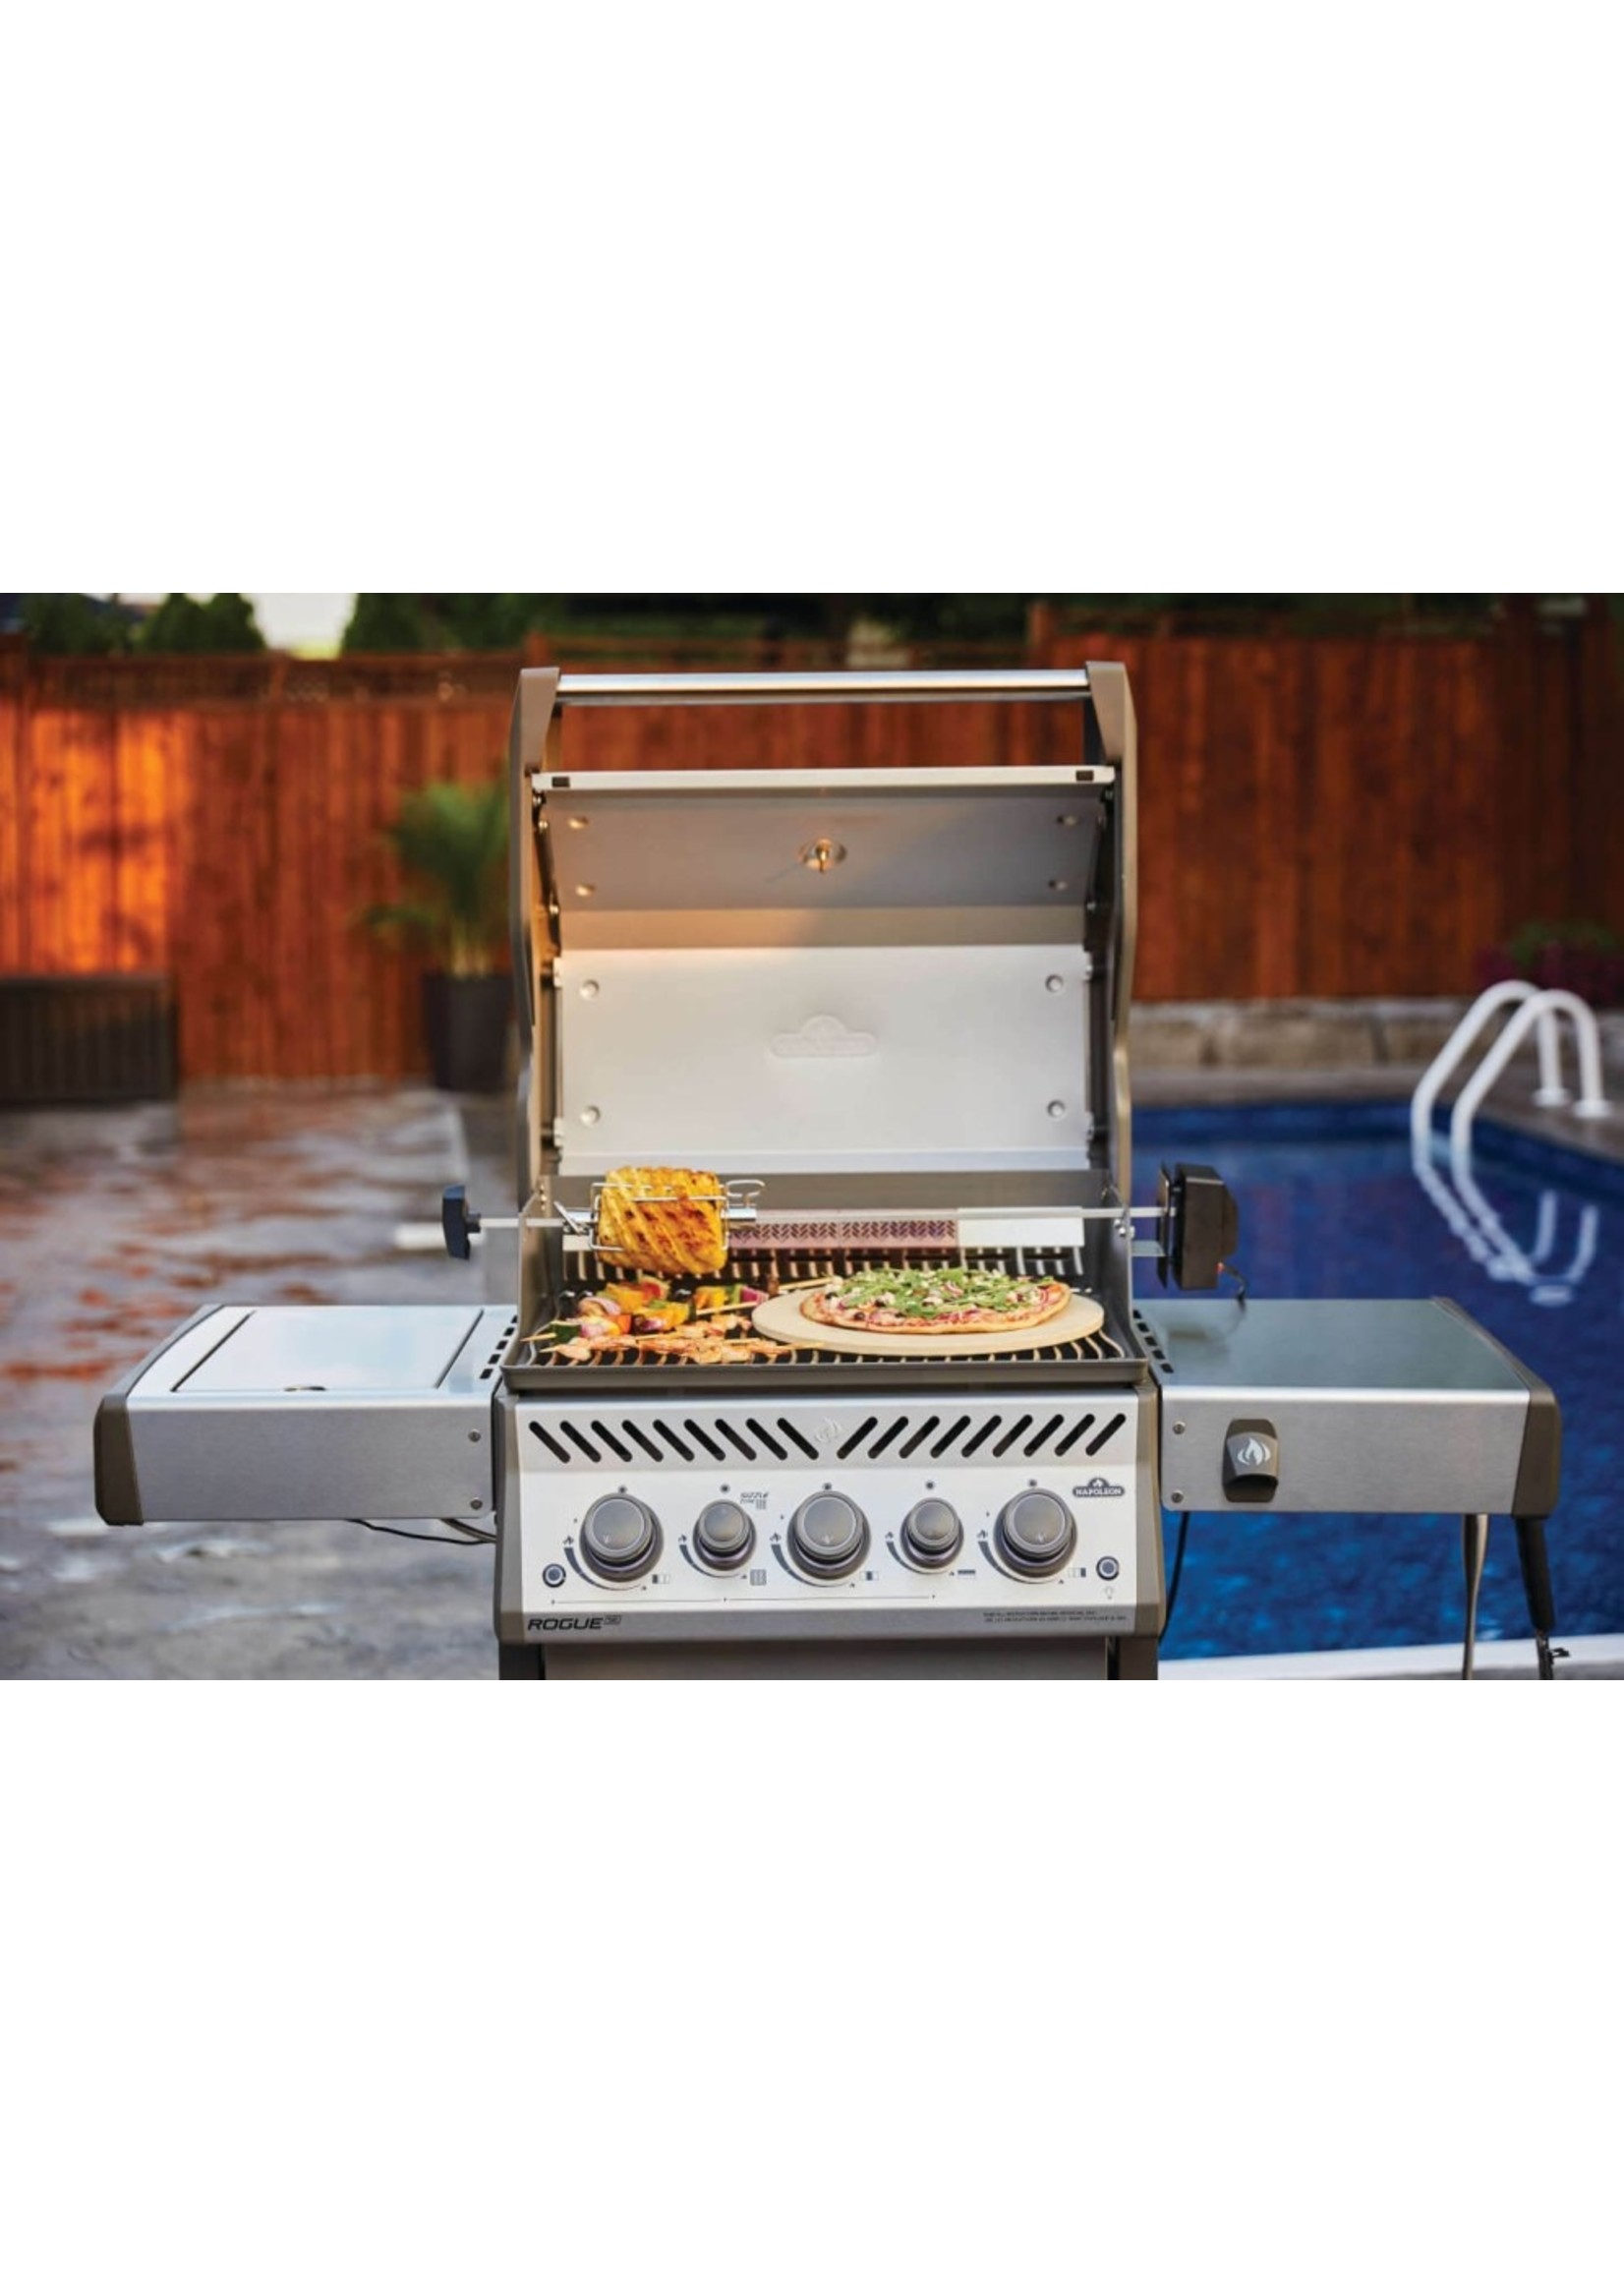 Napoleon ROGUE® SE 425 NATURAL GAS GRILL WITH INFRARED REAR AND SIDE BURNERS, STAINLESS STEEL